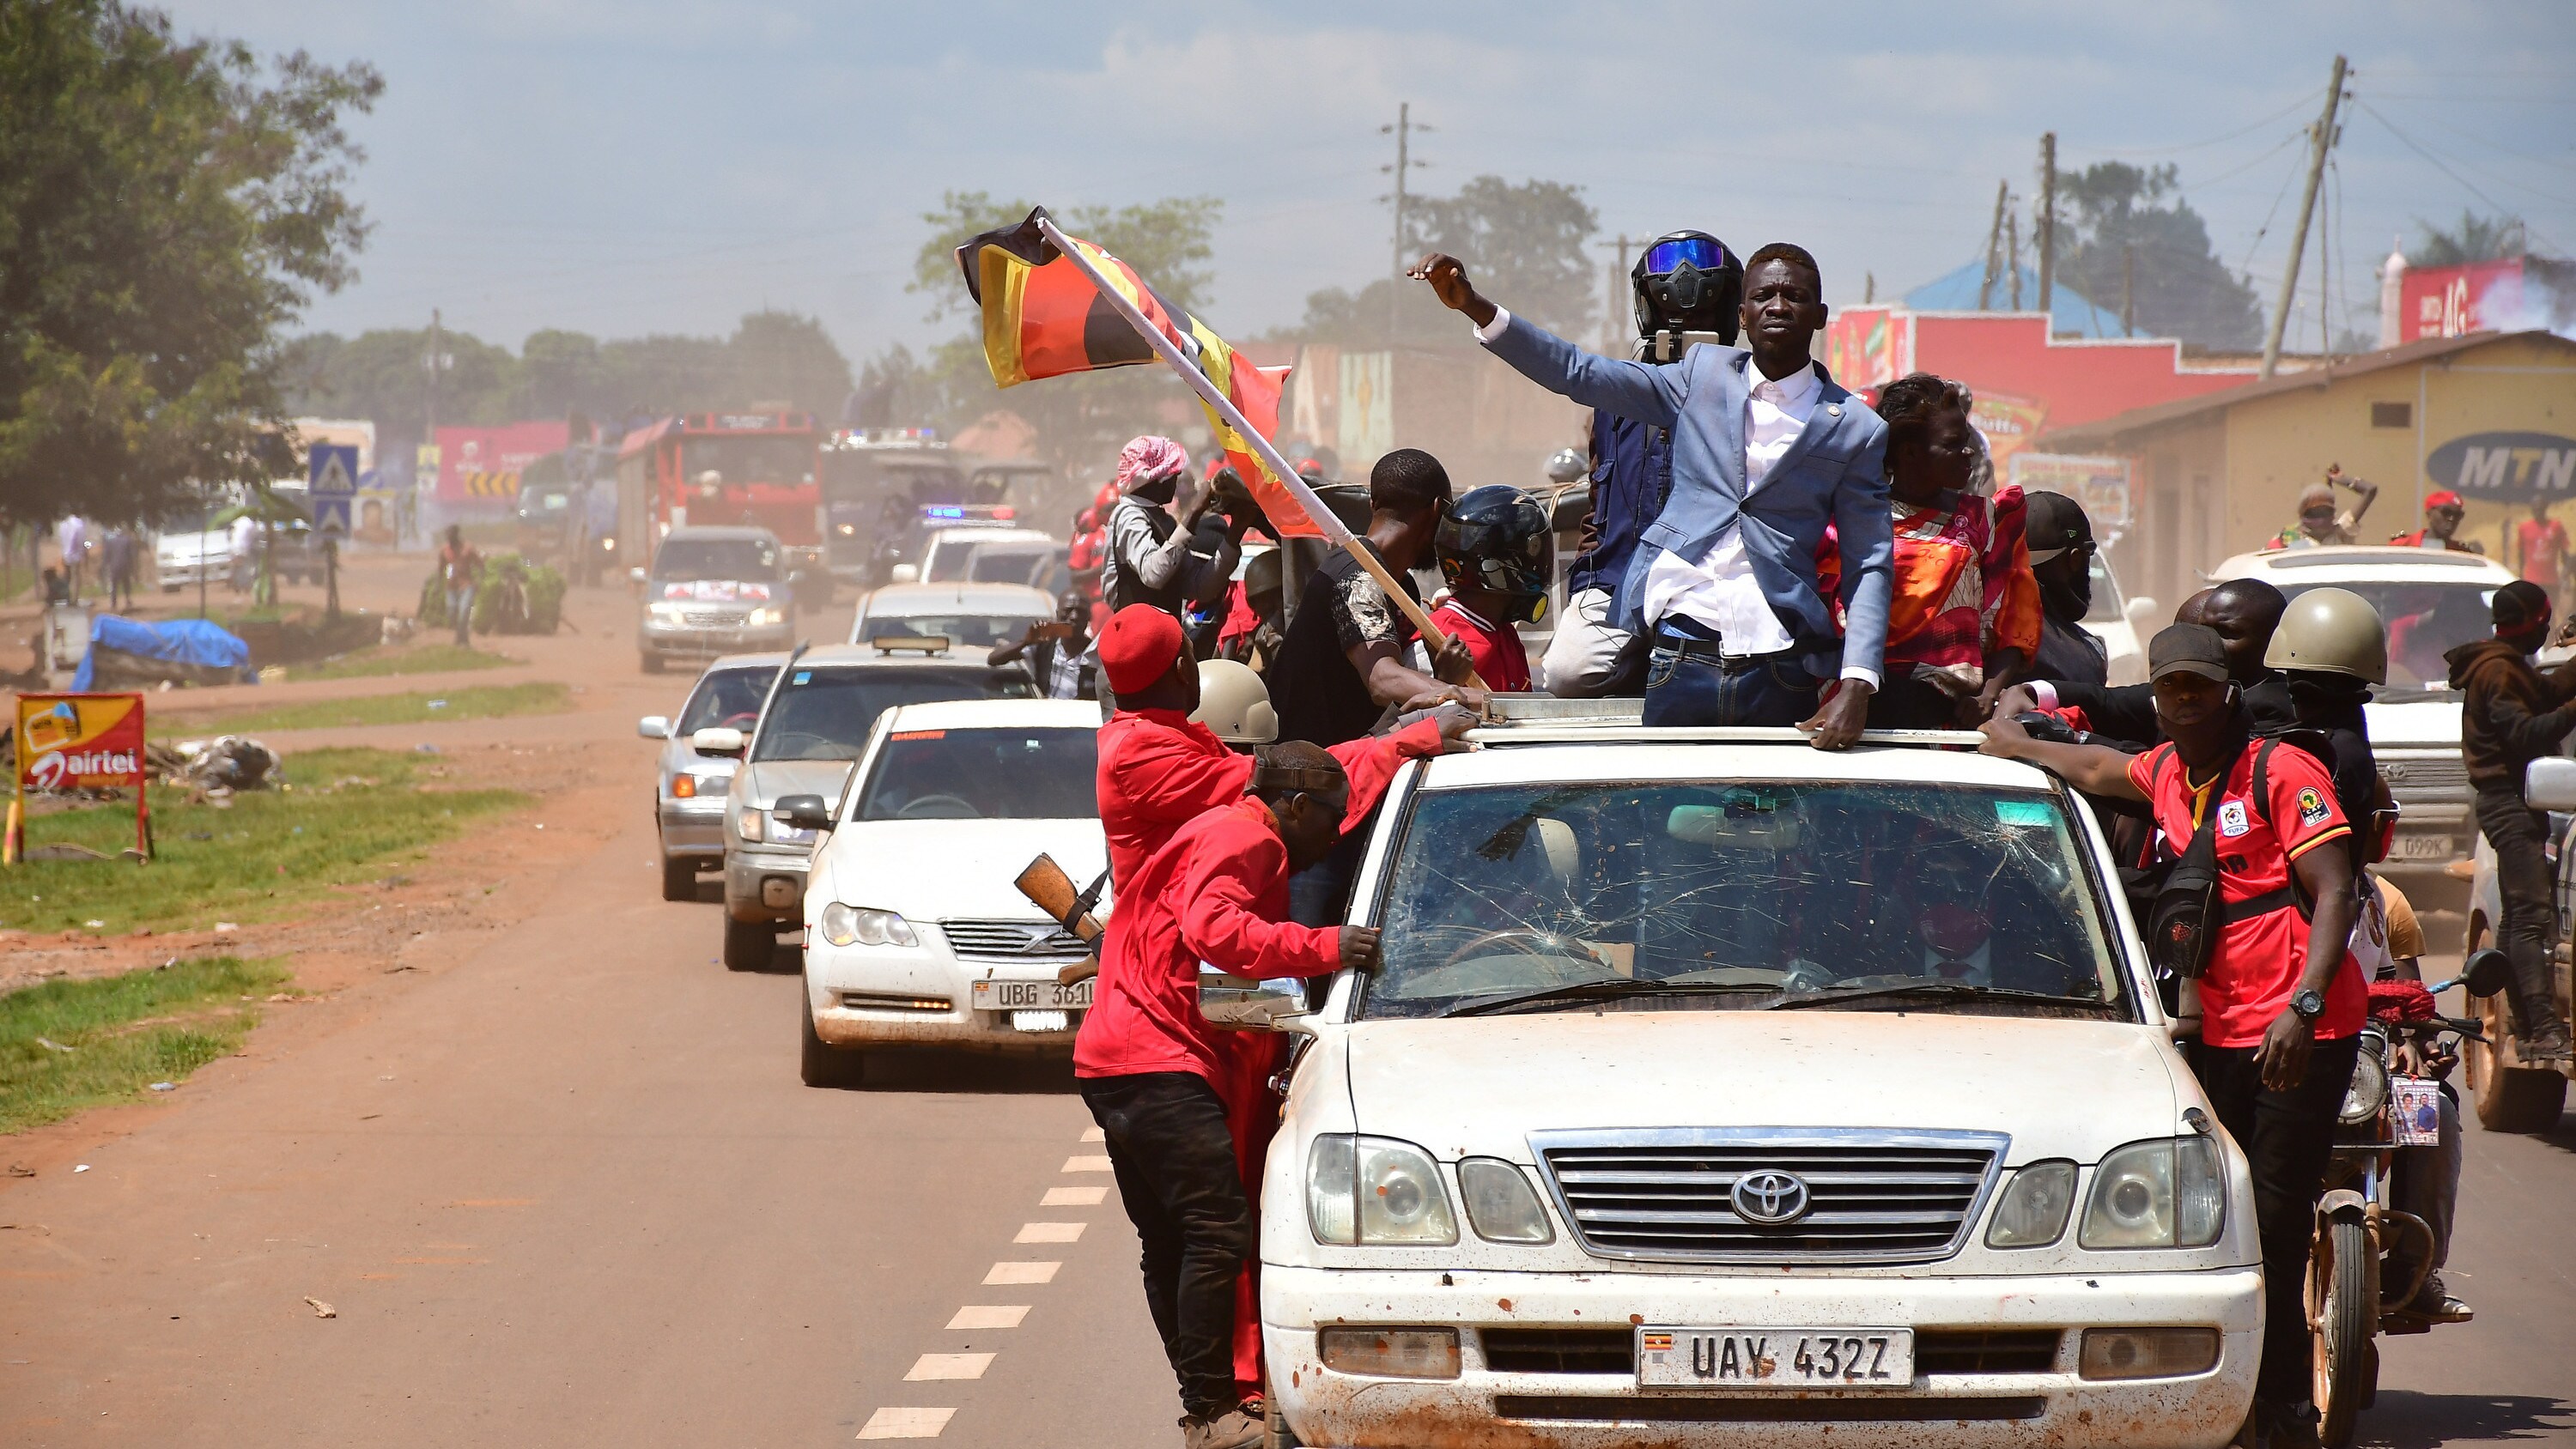 Bob i Wine atop his vehicle as he drove through Kayunga district during the presidential campaigns that were flawed with brutality and violence by security agencies, December 1, 2020. (photo credit: Lookman Kampala)